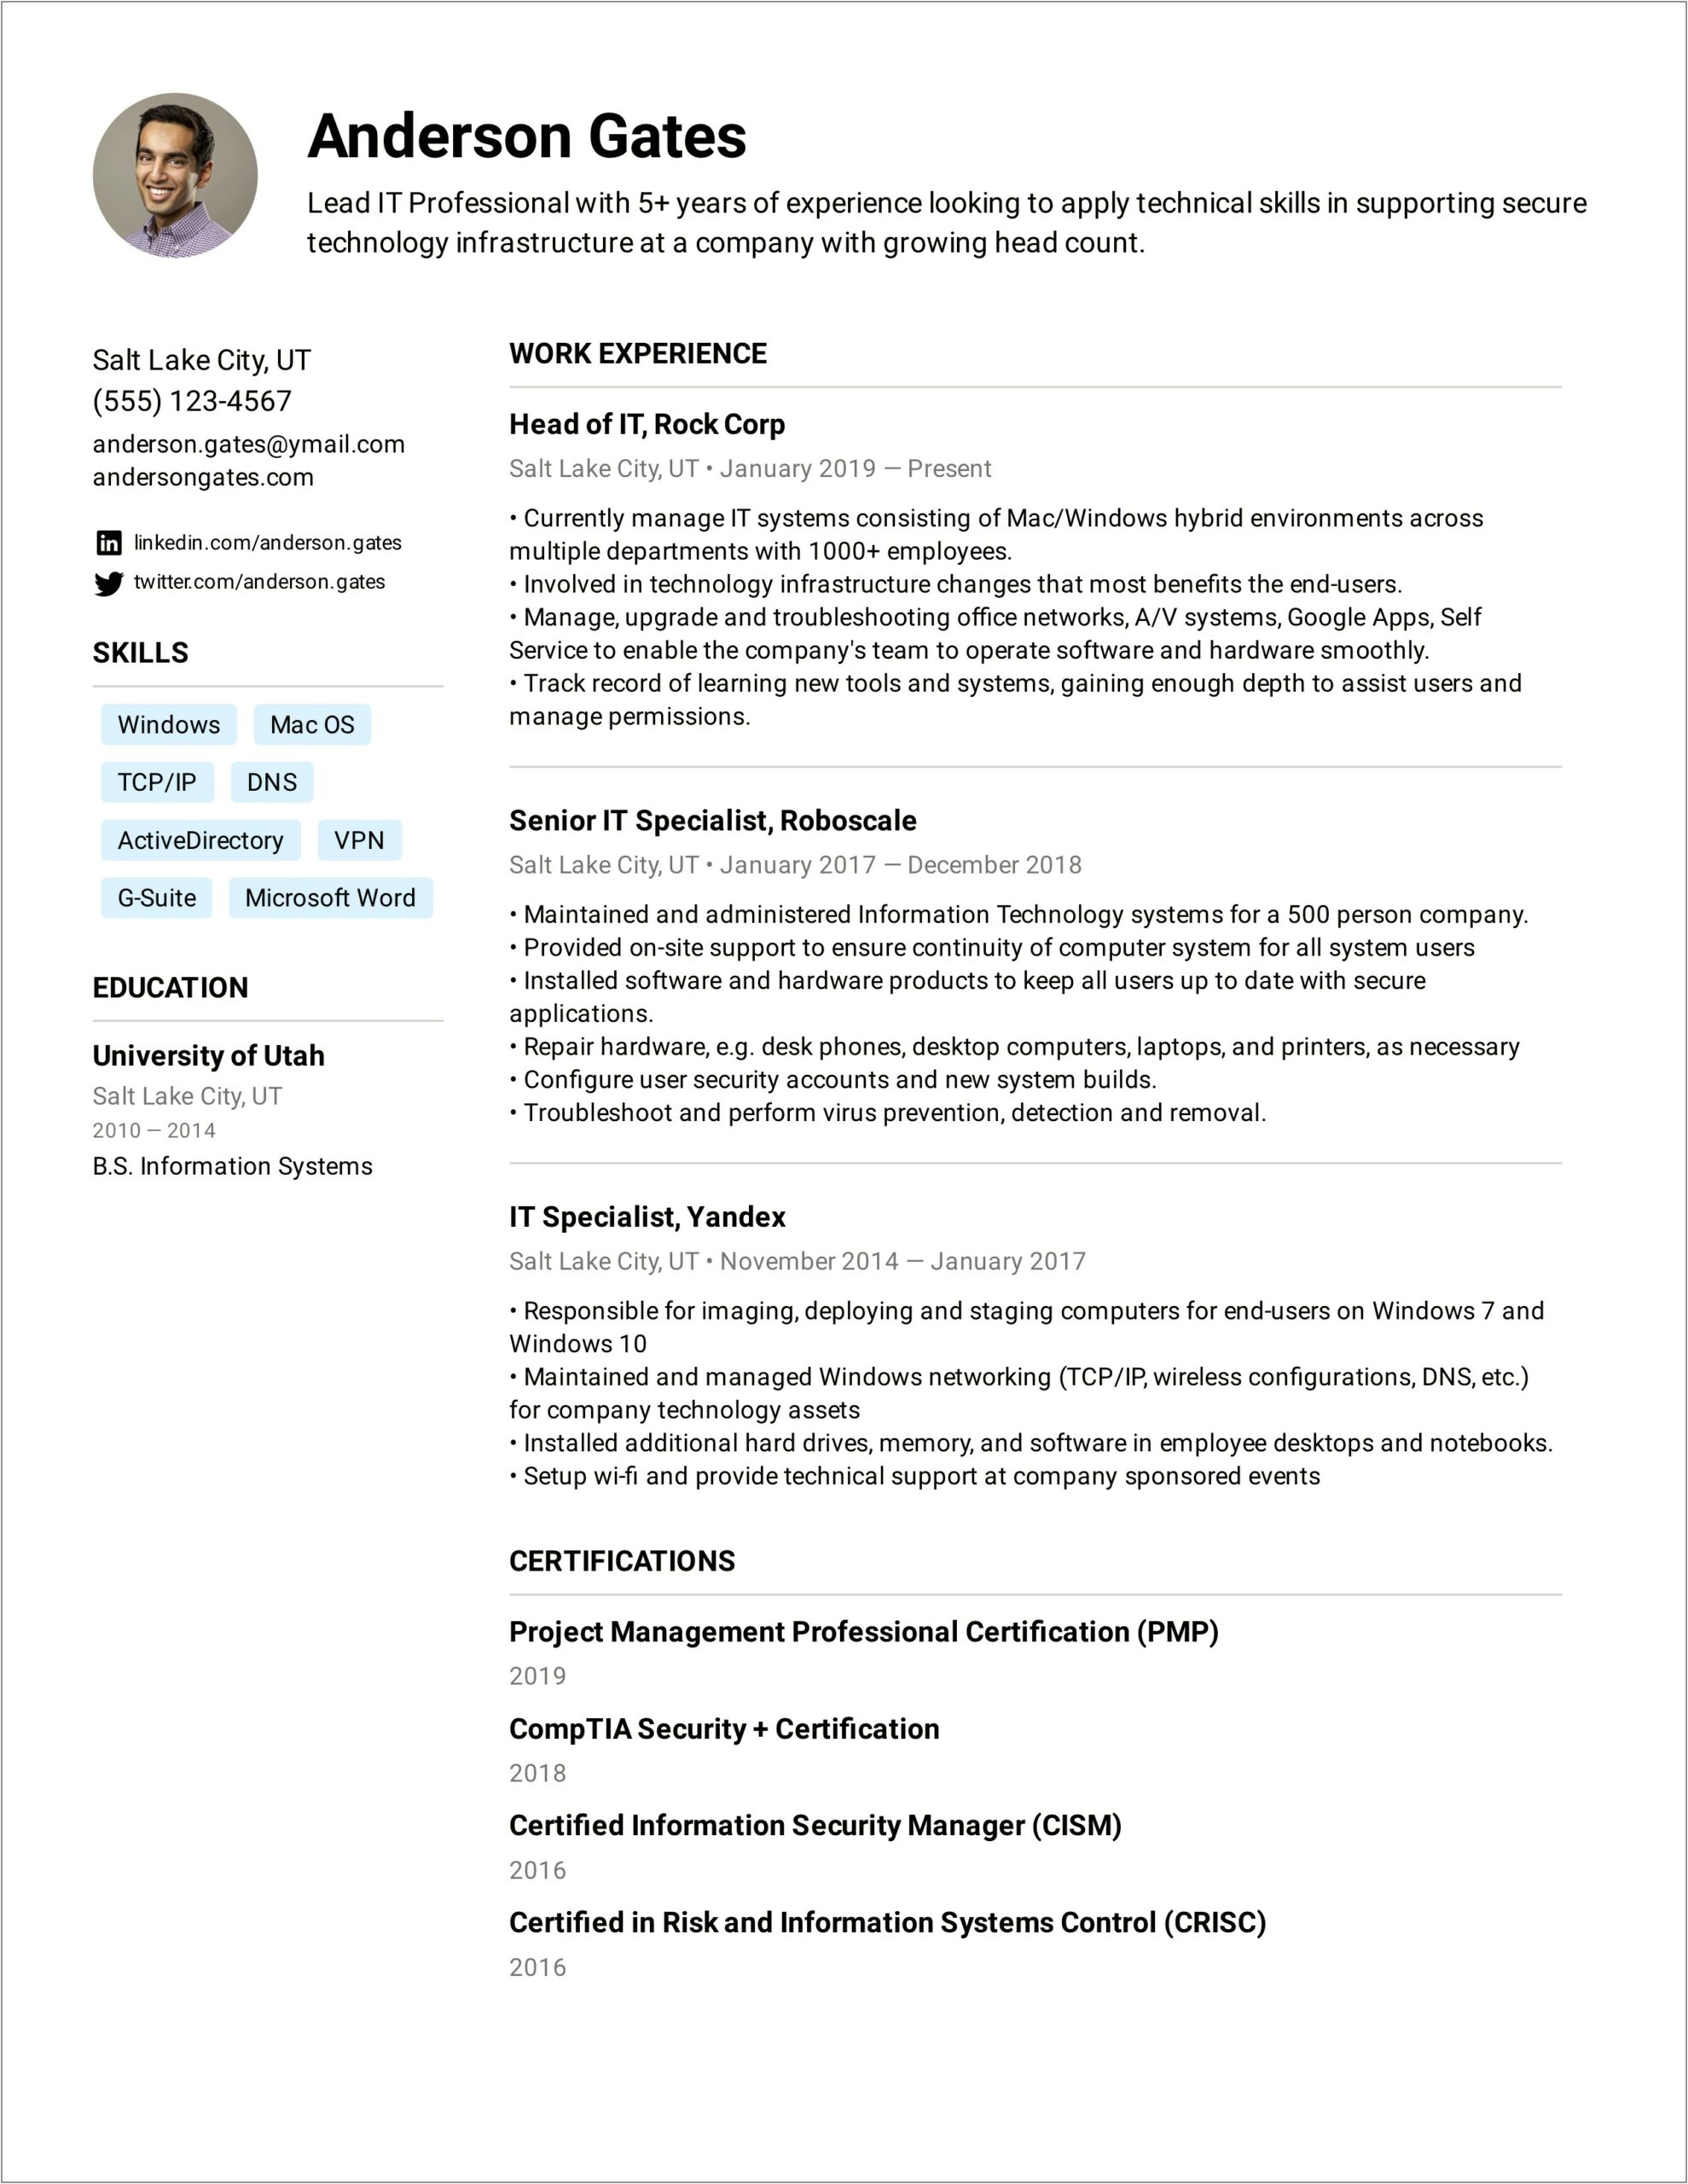 Resume Colors That Attract Hiring Managers